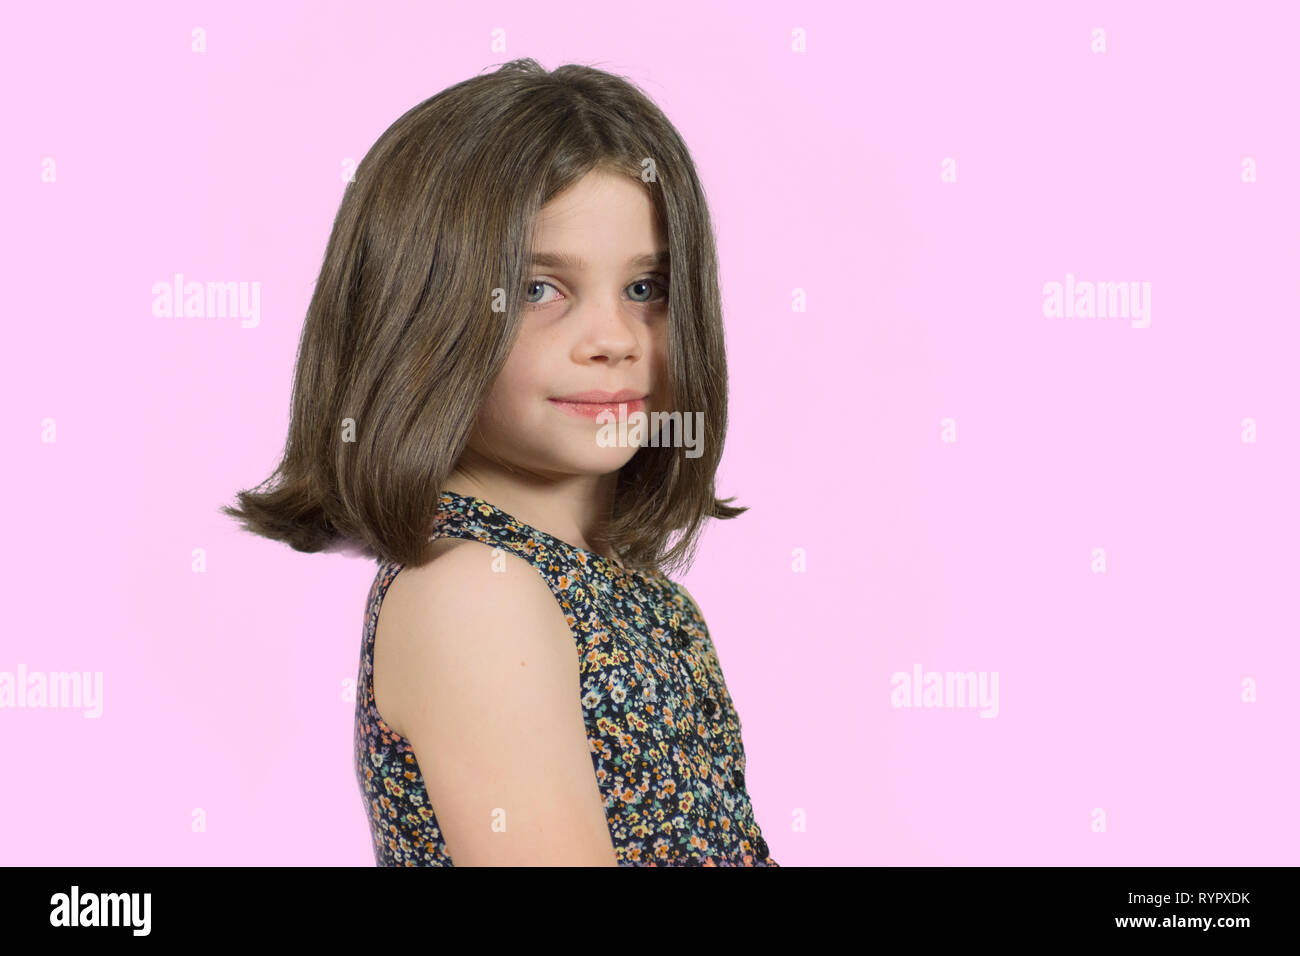 Little Girl With Short Hair Stock Photos Little Girl With